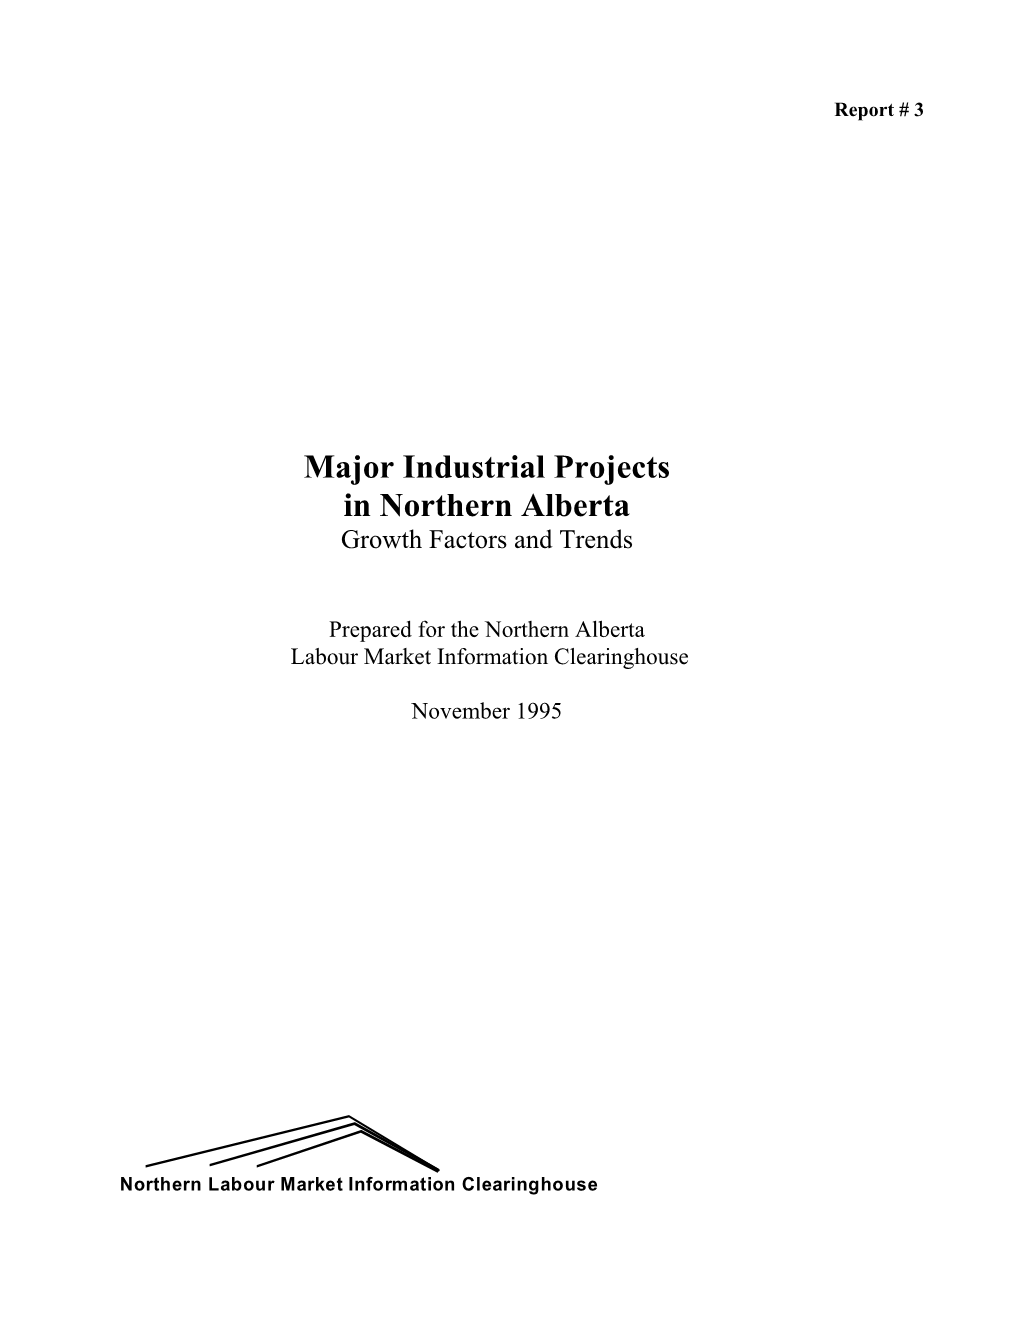 Major Industrial Projects in Northern Alberta, Growth Factors and Trends